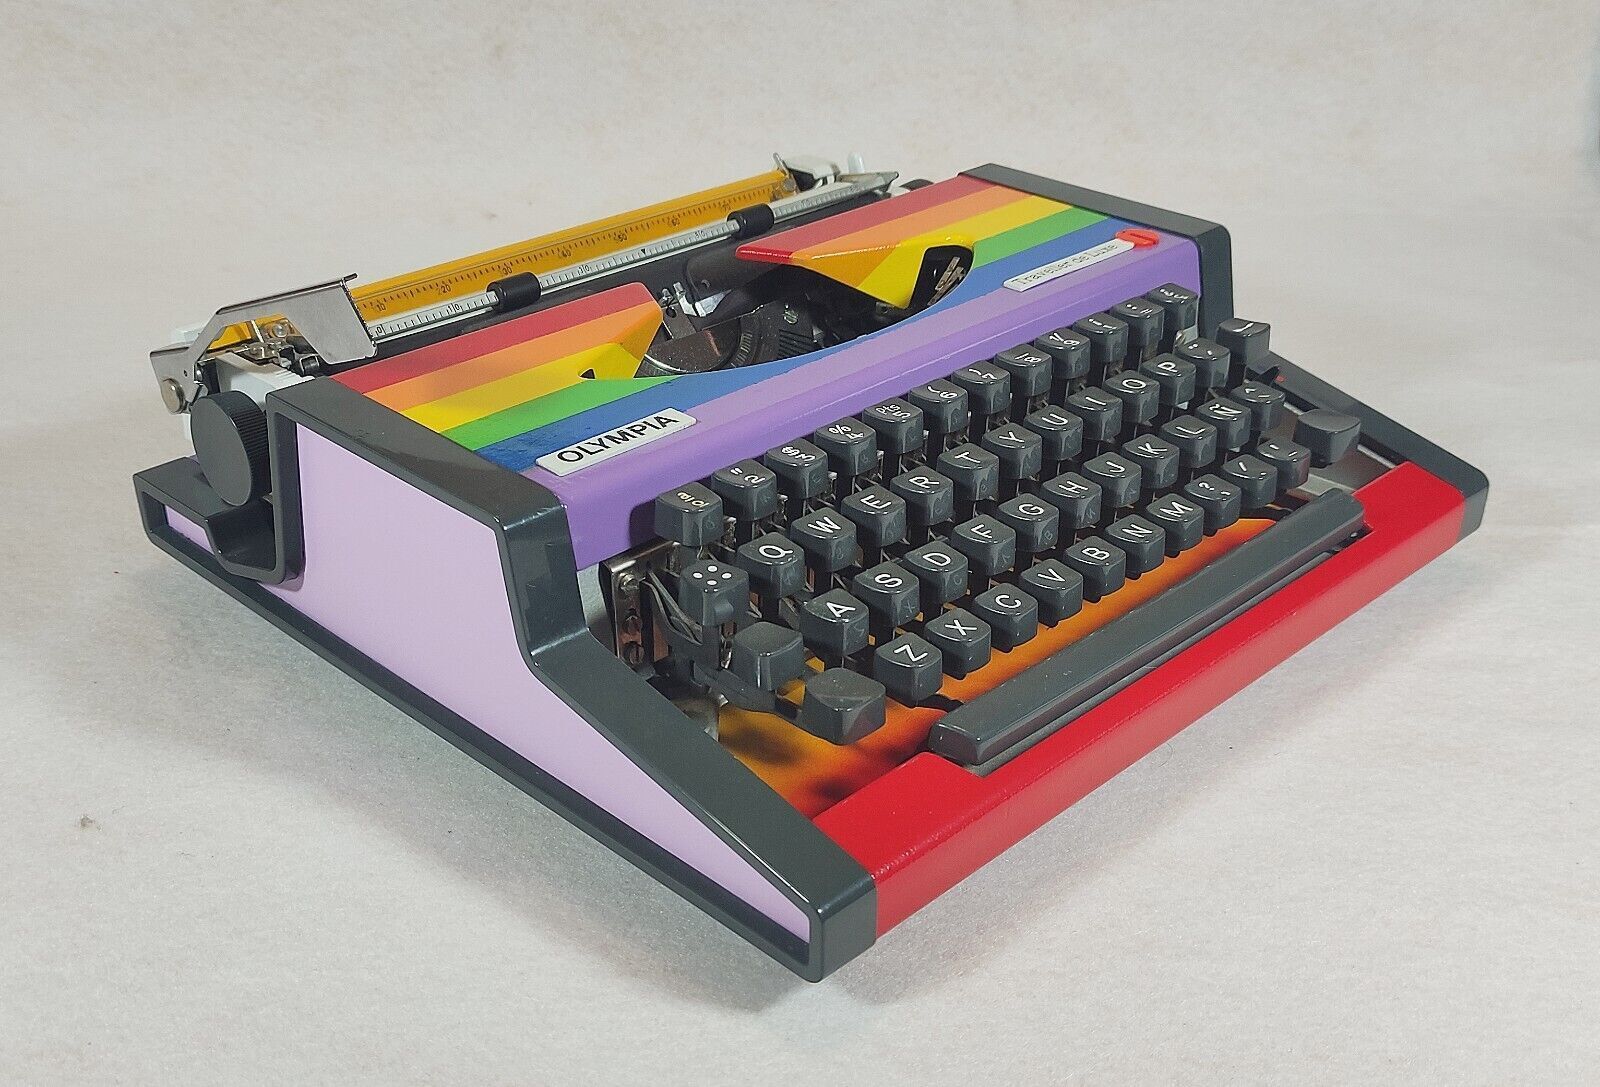 Vintage Olympia typewriter from the 70s – LGBT Rainbow Edition.